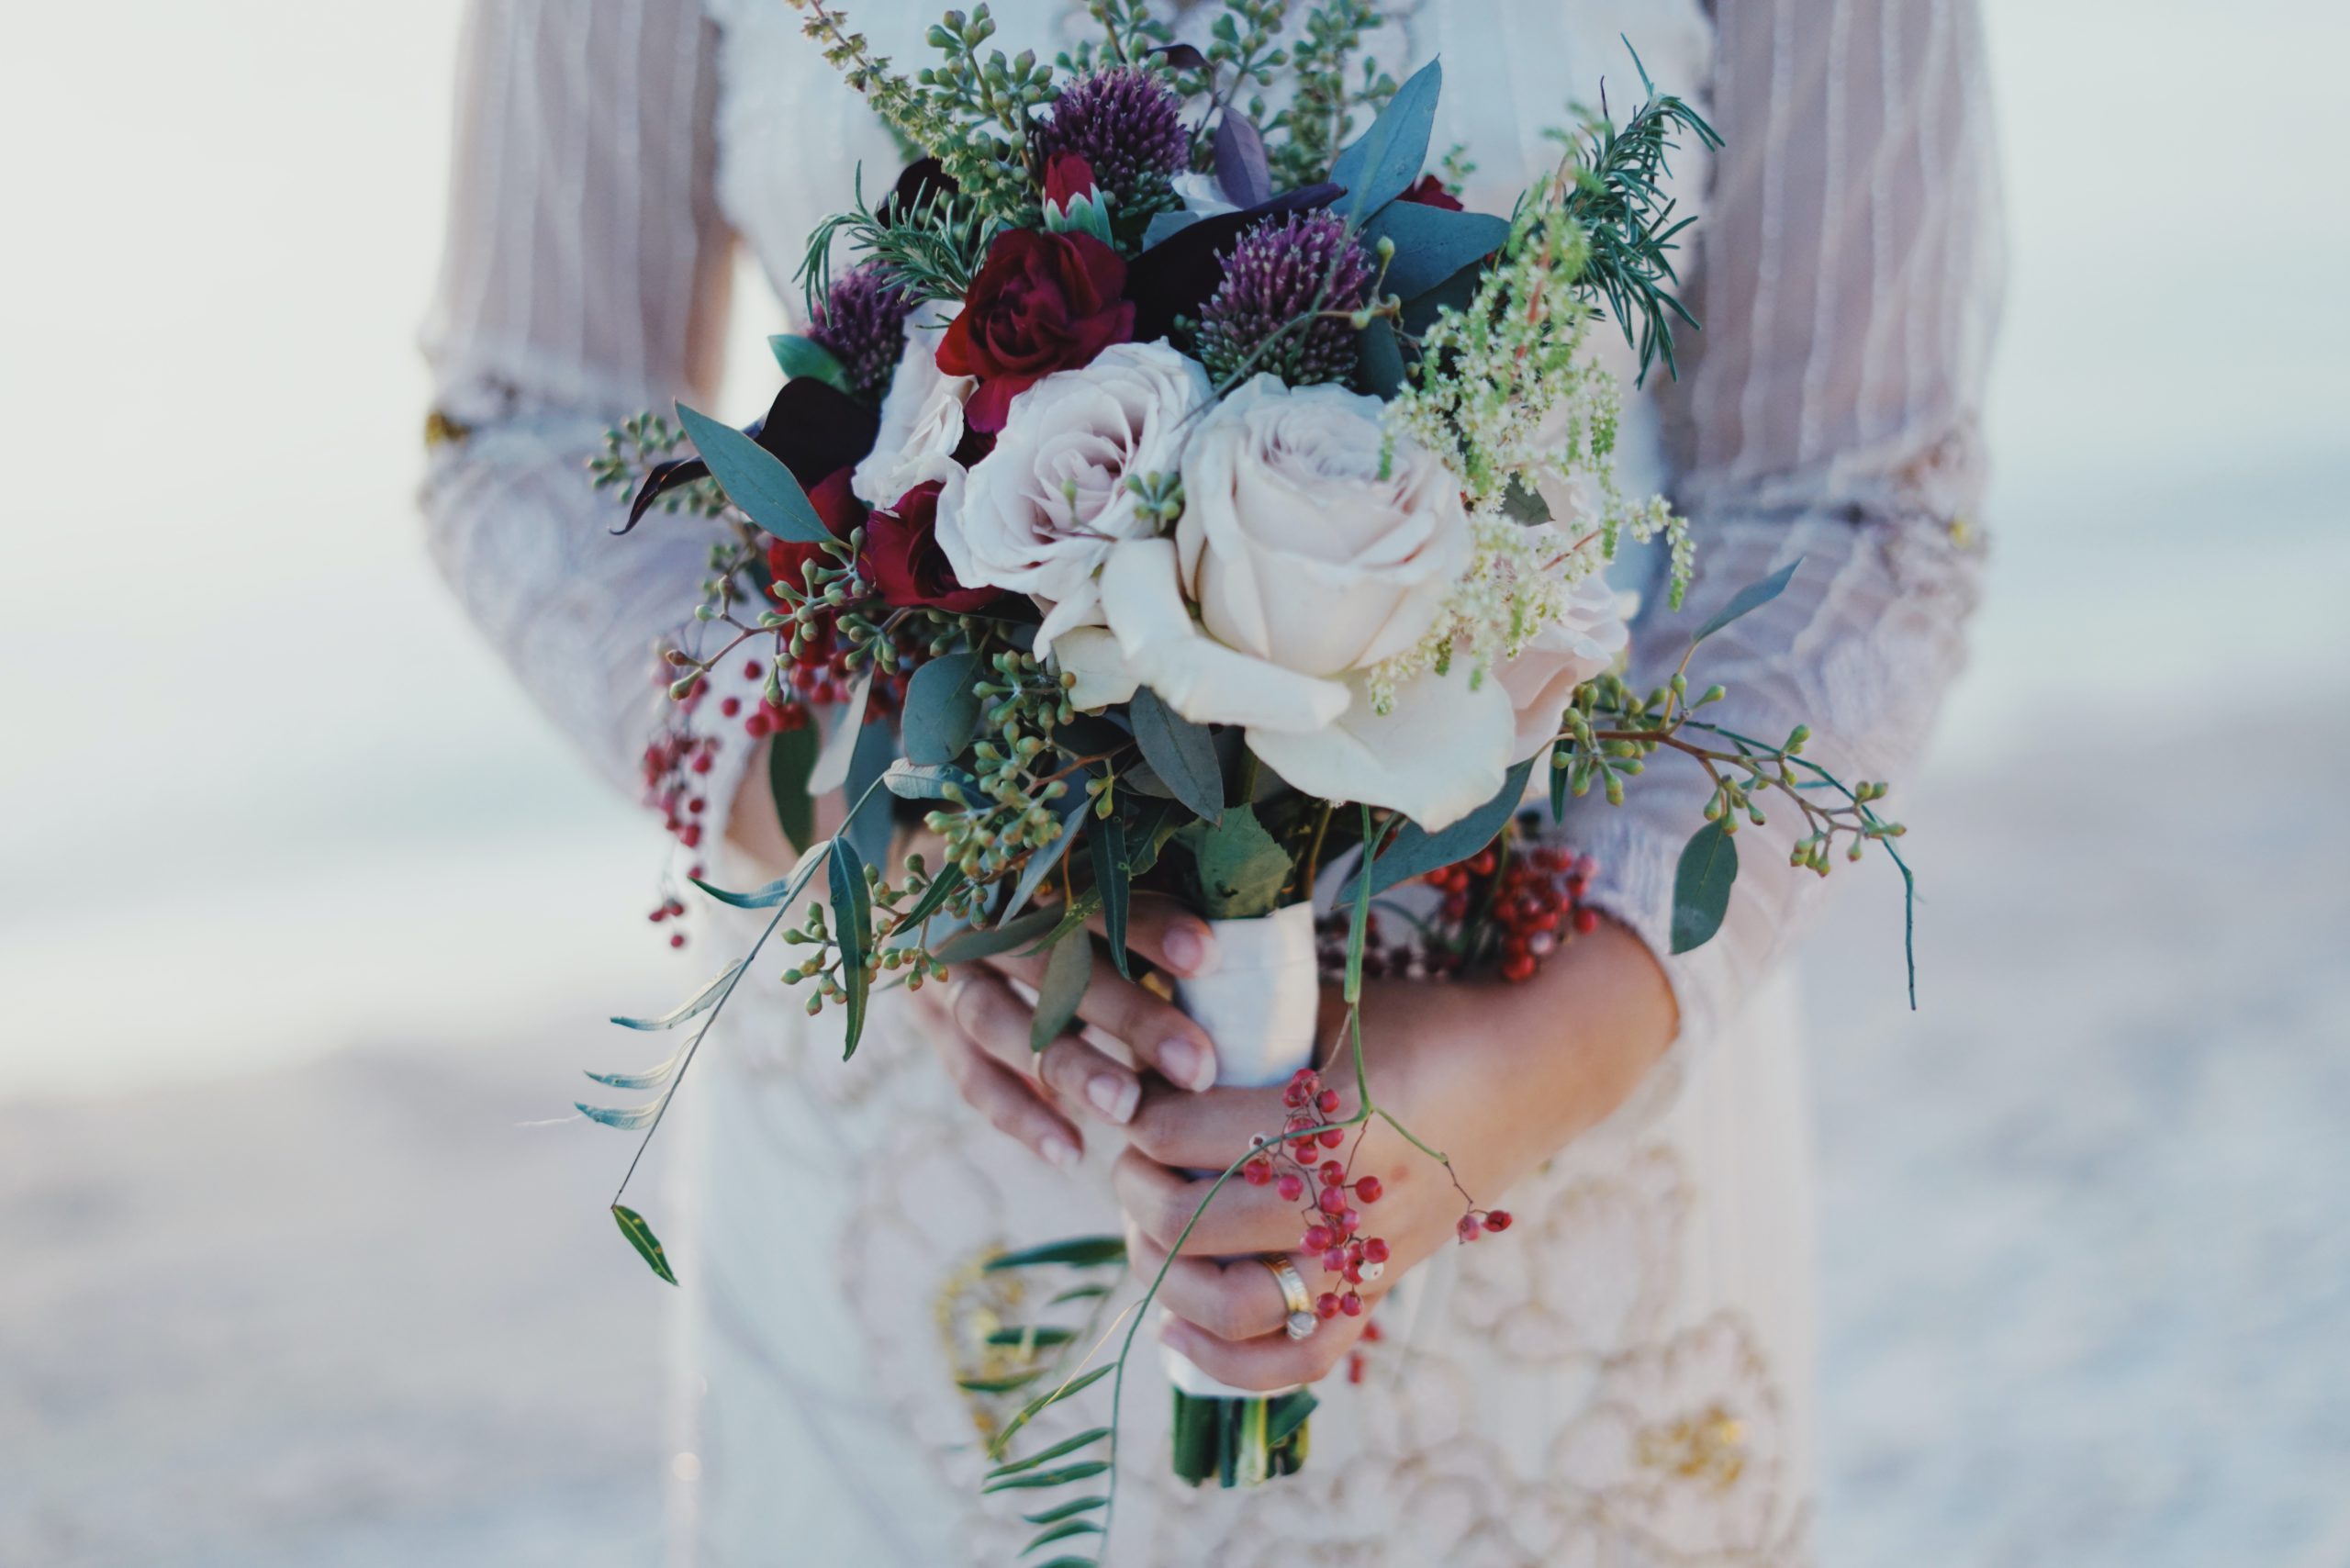 10 Beautiful Summer Wedding Bouquet Designs on your Big Day